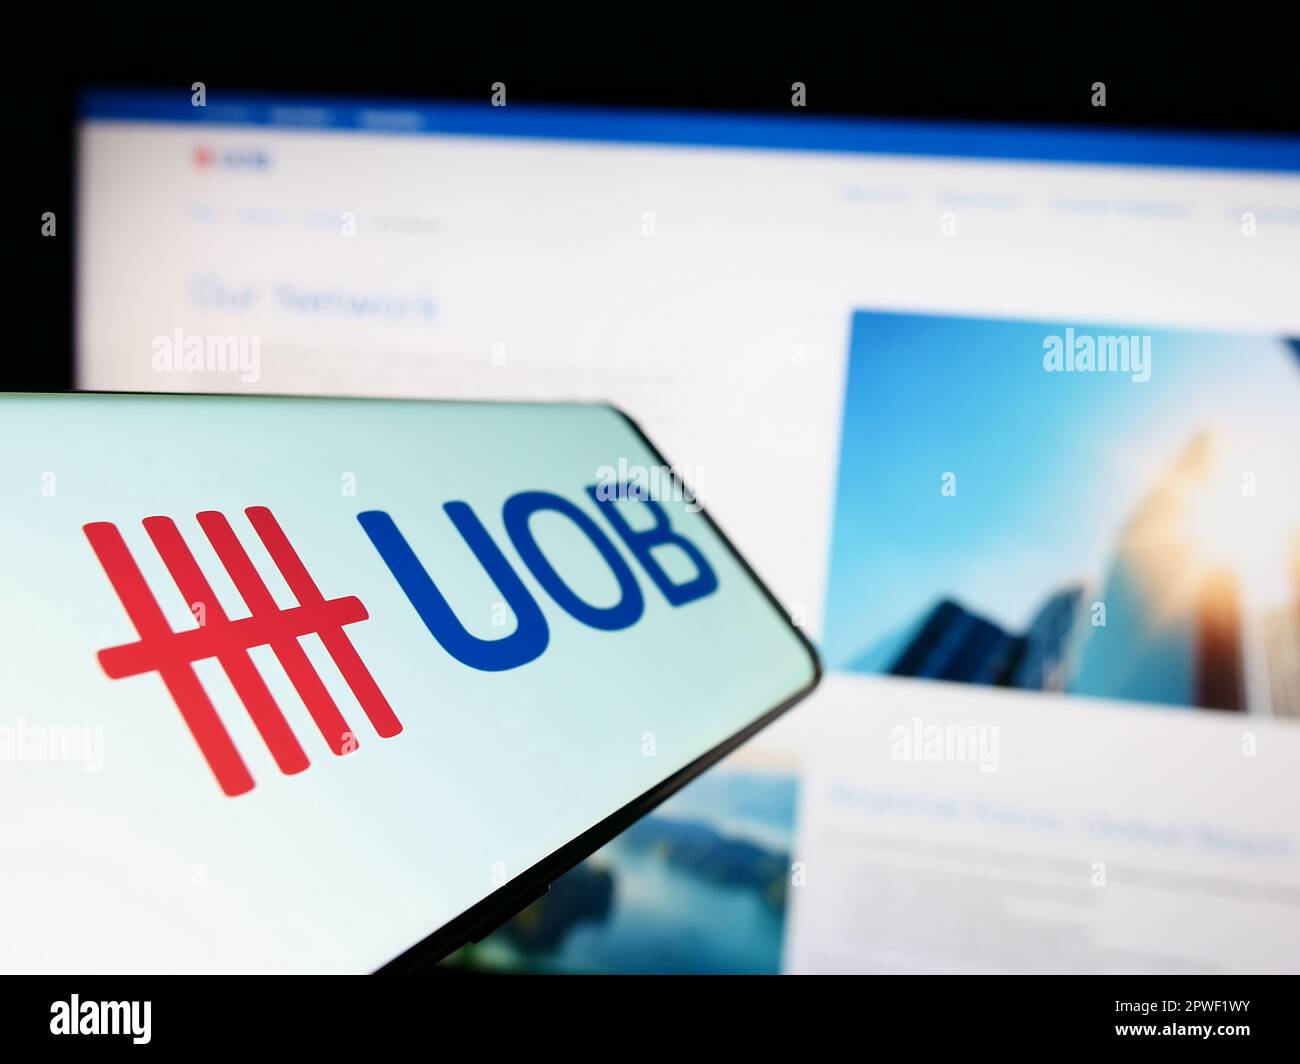 Cellphone with logo of company United Overseas Bank Limited (UOB) on screen in front of business website. Focus on center-left of phone display. Stock Photo